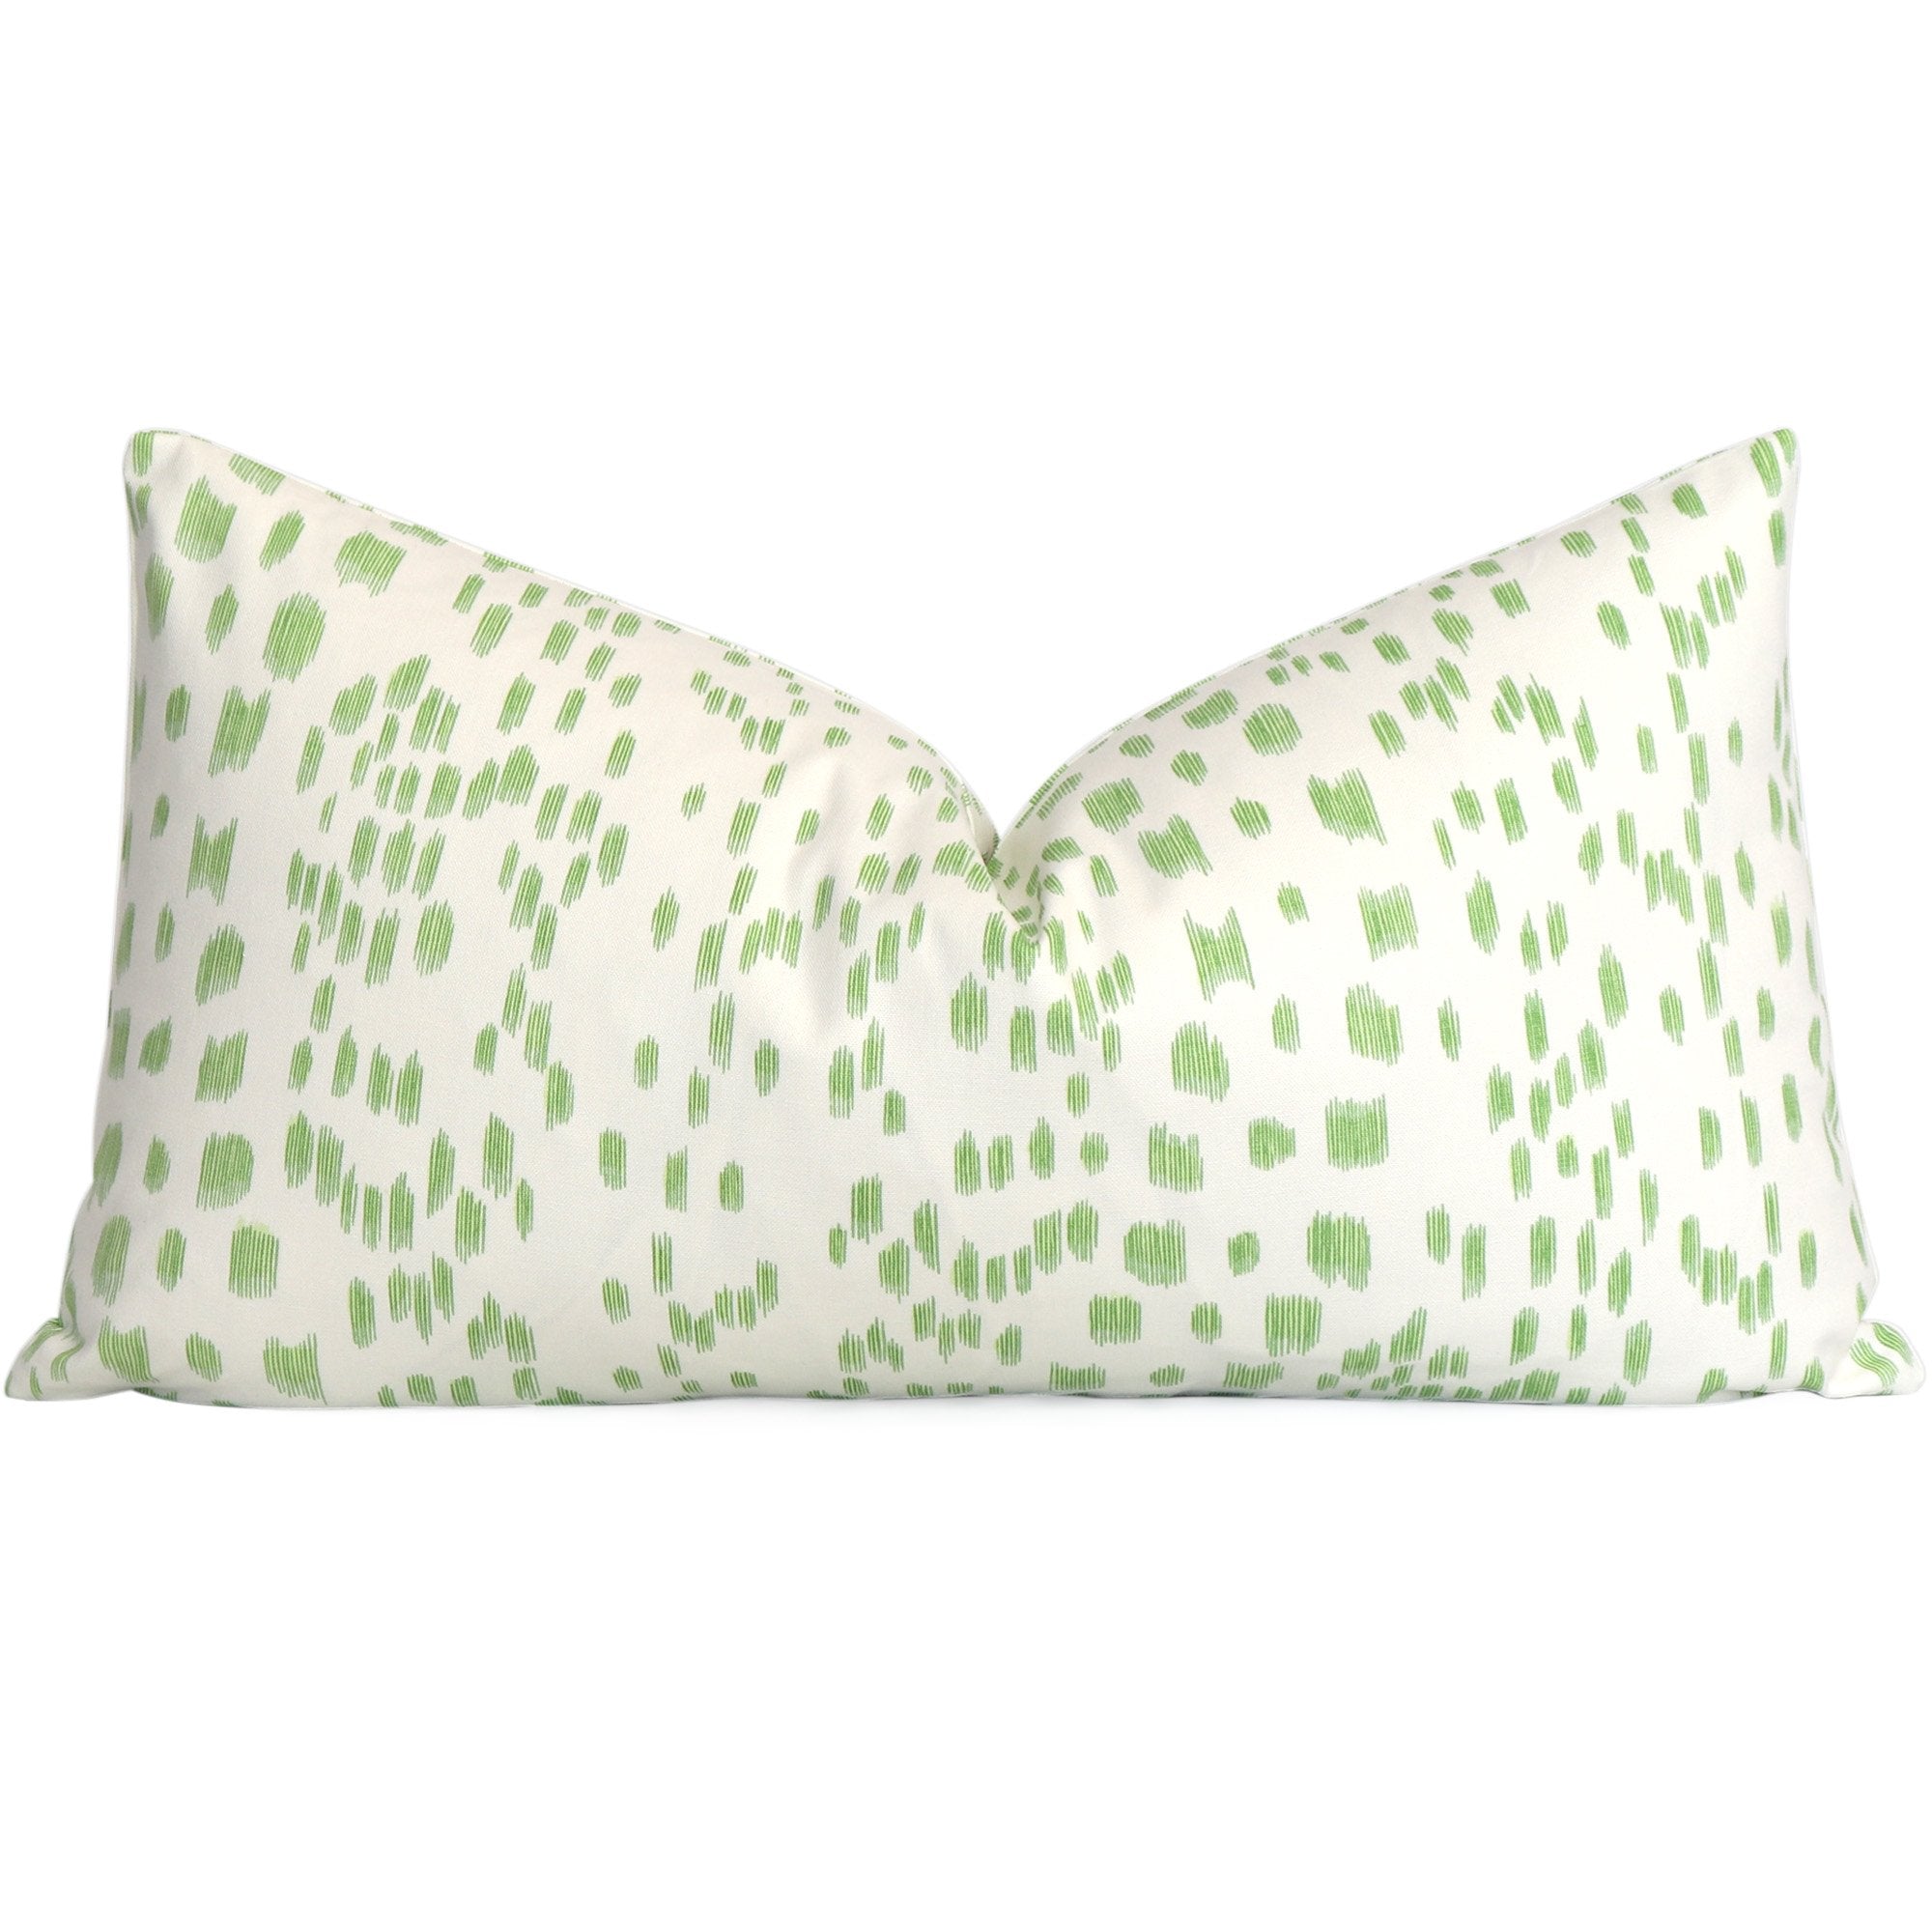 Brunschwig Fils Les Touches Grey Spotted Throw Pillow - Chloe & Olive